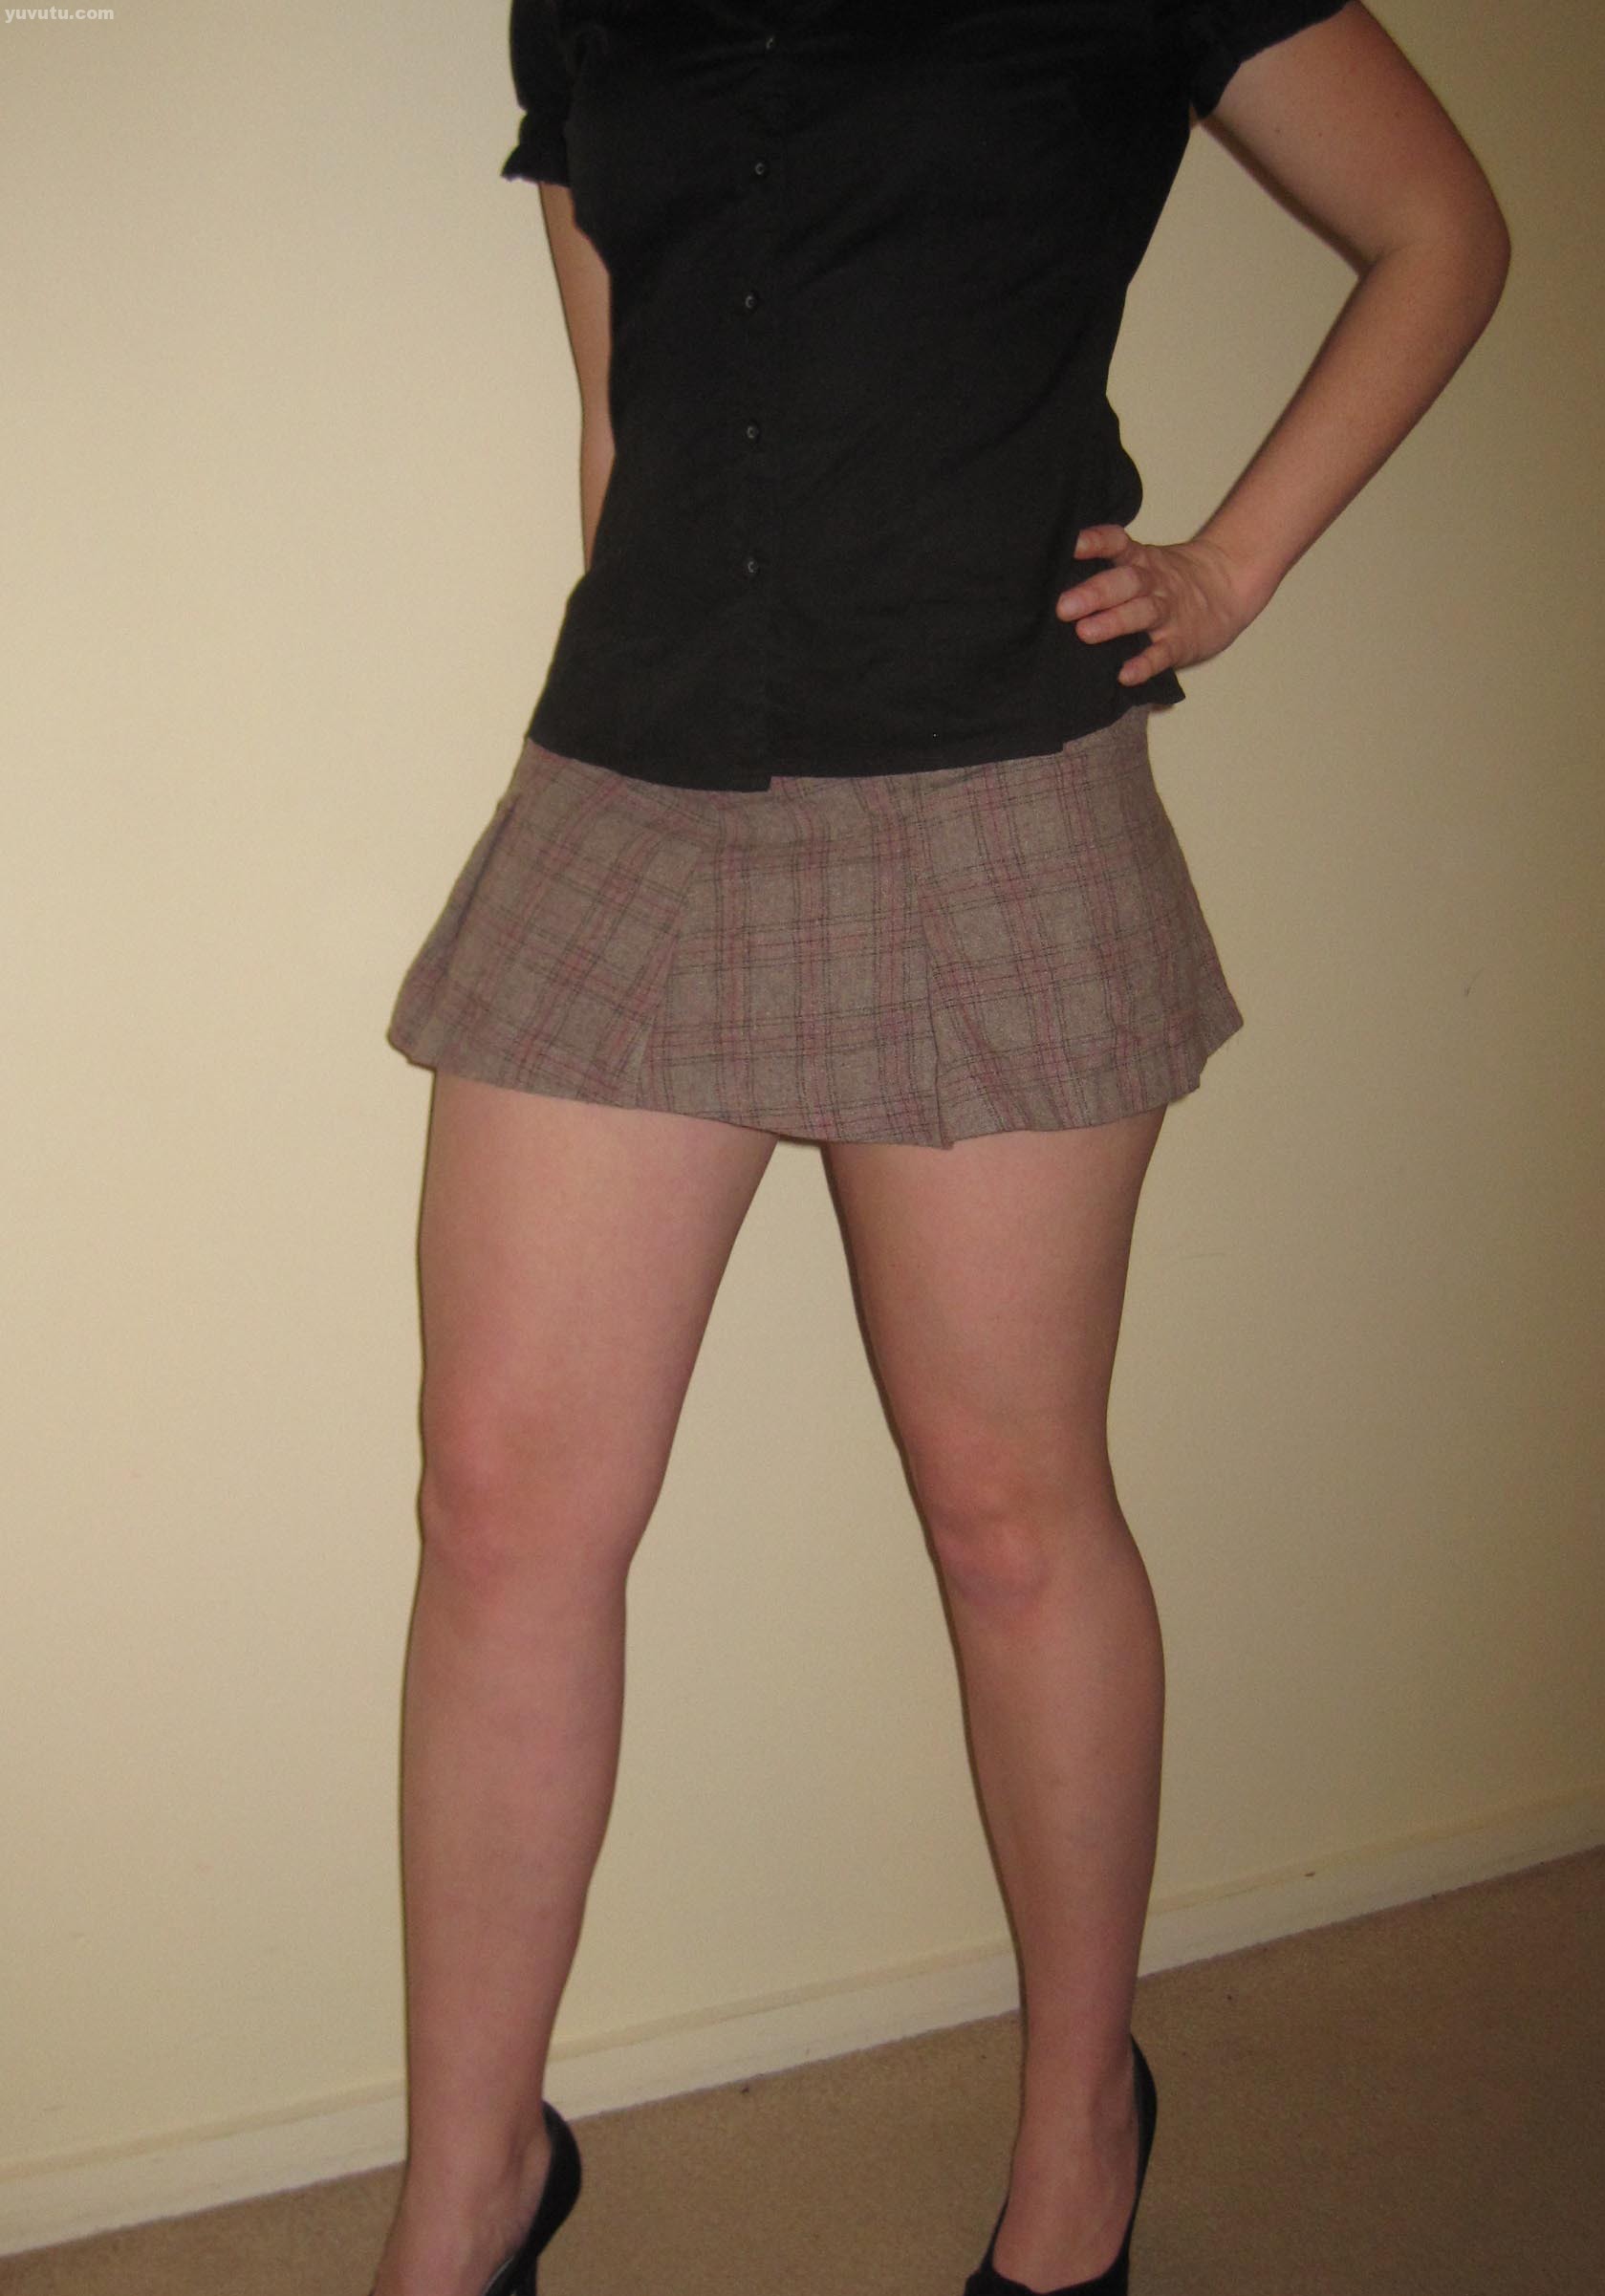 Short skirt On Yuvutu Homemade Amateur Porn Movies And XXX Sex Videos photo picture